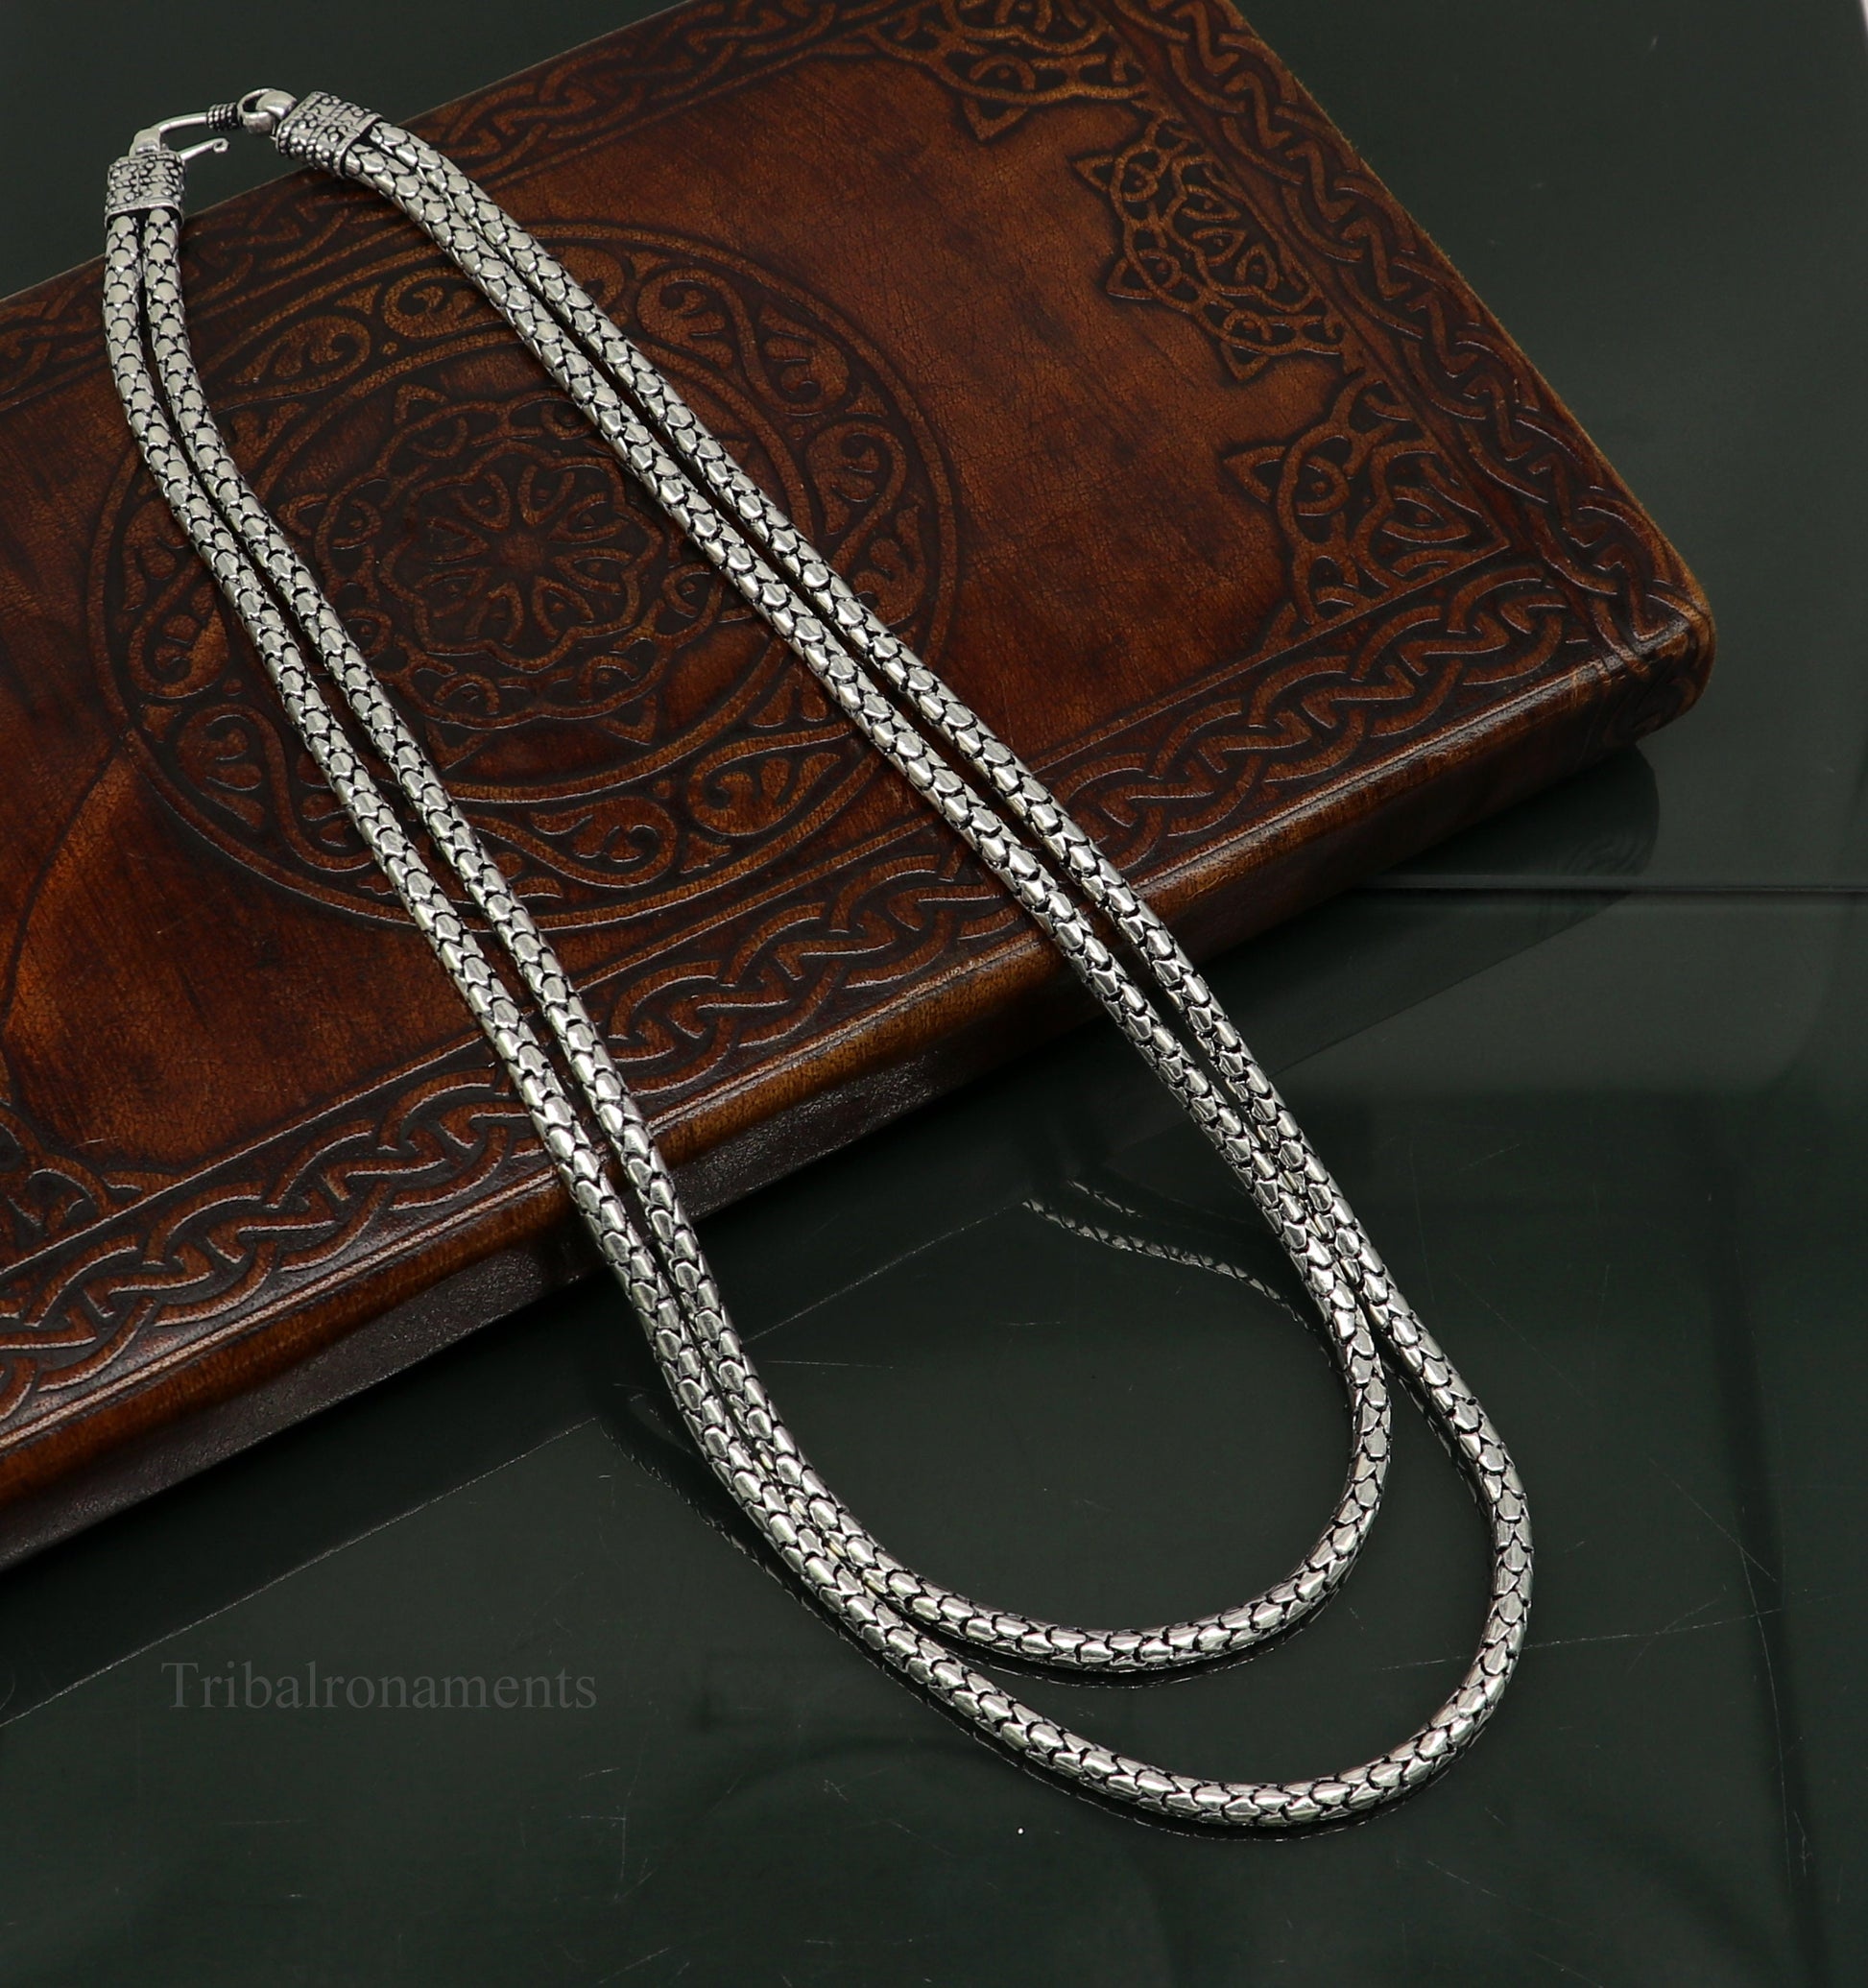 925 sterling silver amazing vintage spotted design chain 2 line/strands stylish necklace jewelry, best charm layered ethnic necklace nec257 - TRIBAL ORNAMENTS